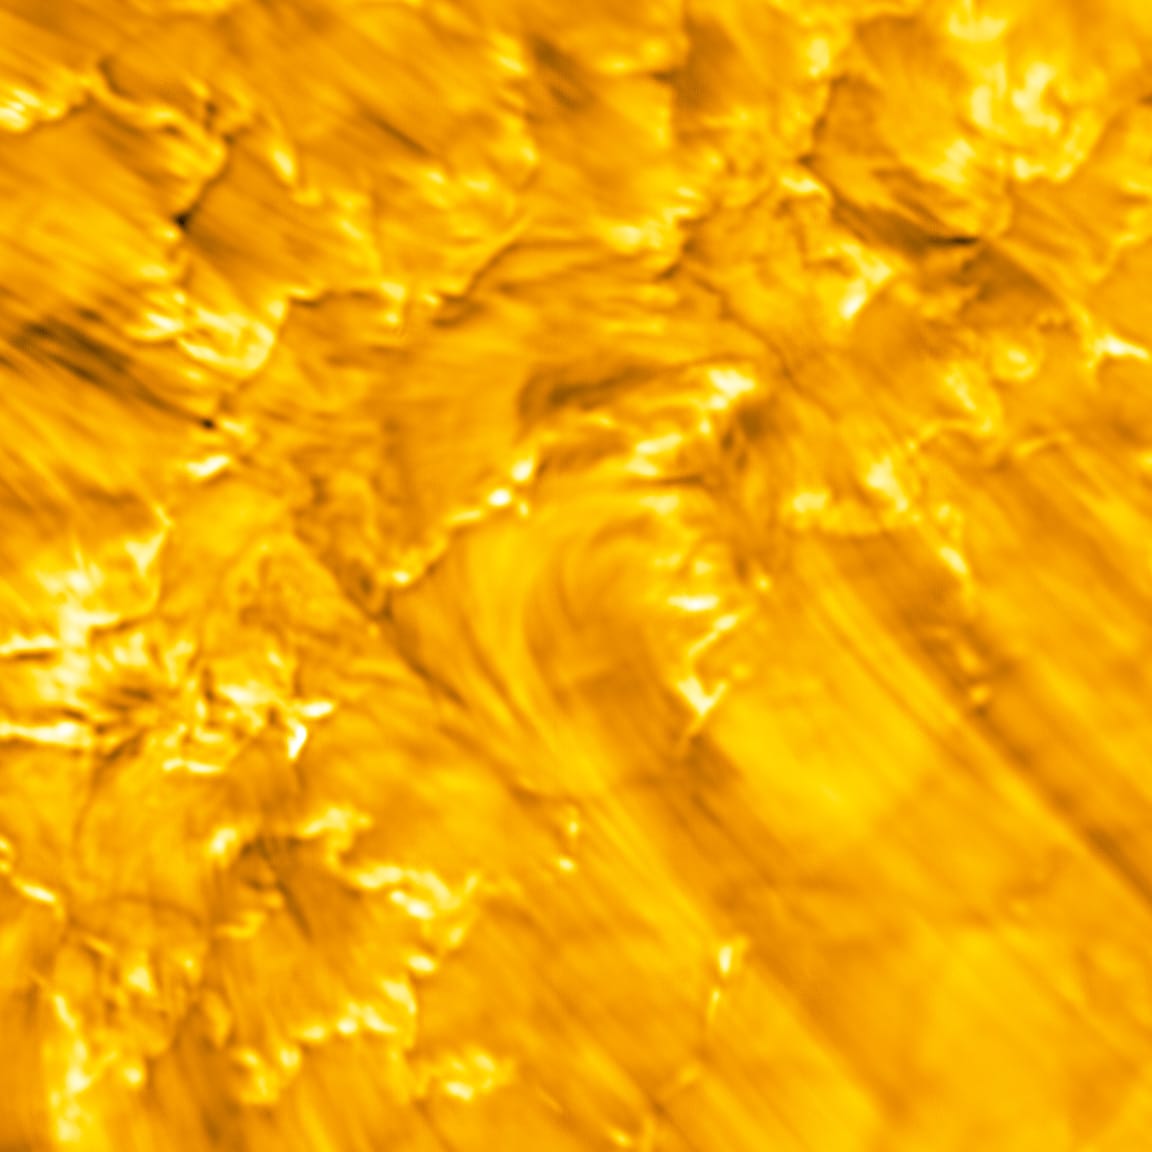 In this image, the fibrillar nature of the solar atmosphere is exemplified. Dark, fine threads (fibrils) are ubiquitous in the chromosphere. The outline of bright structures are signature of the presence of magnetic fields in the photosphere below. This image was captured by the Inouye Solar Telescope during a coordinated observation campaign with NASA’s Parker Solar Probe and ESA’s Solar Orbiter.